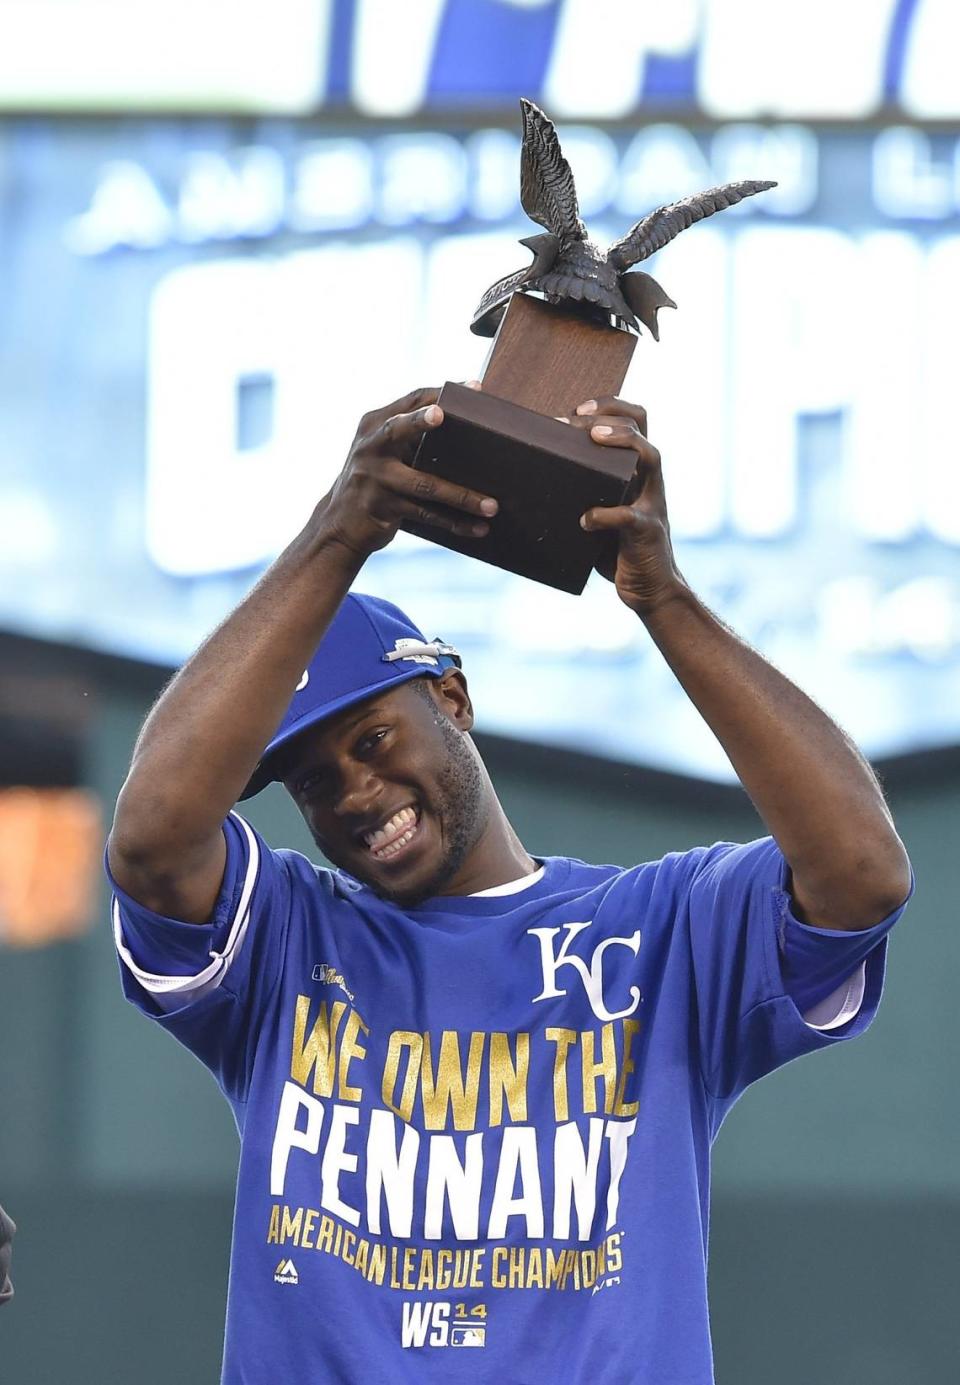 Kansas City Royals center fielder Lorenzo Cain hoisted the ALCS MVP trophy after the Royals beat the Orioles at the ALCS playoff baseball game on October 15, 2014 at Kauffman Stadium in Kansas City, MO. The Royals defeated the Orioles 2-1 to win the ALCS.